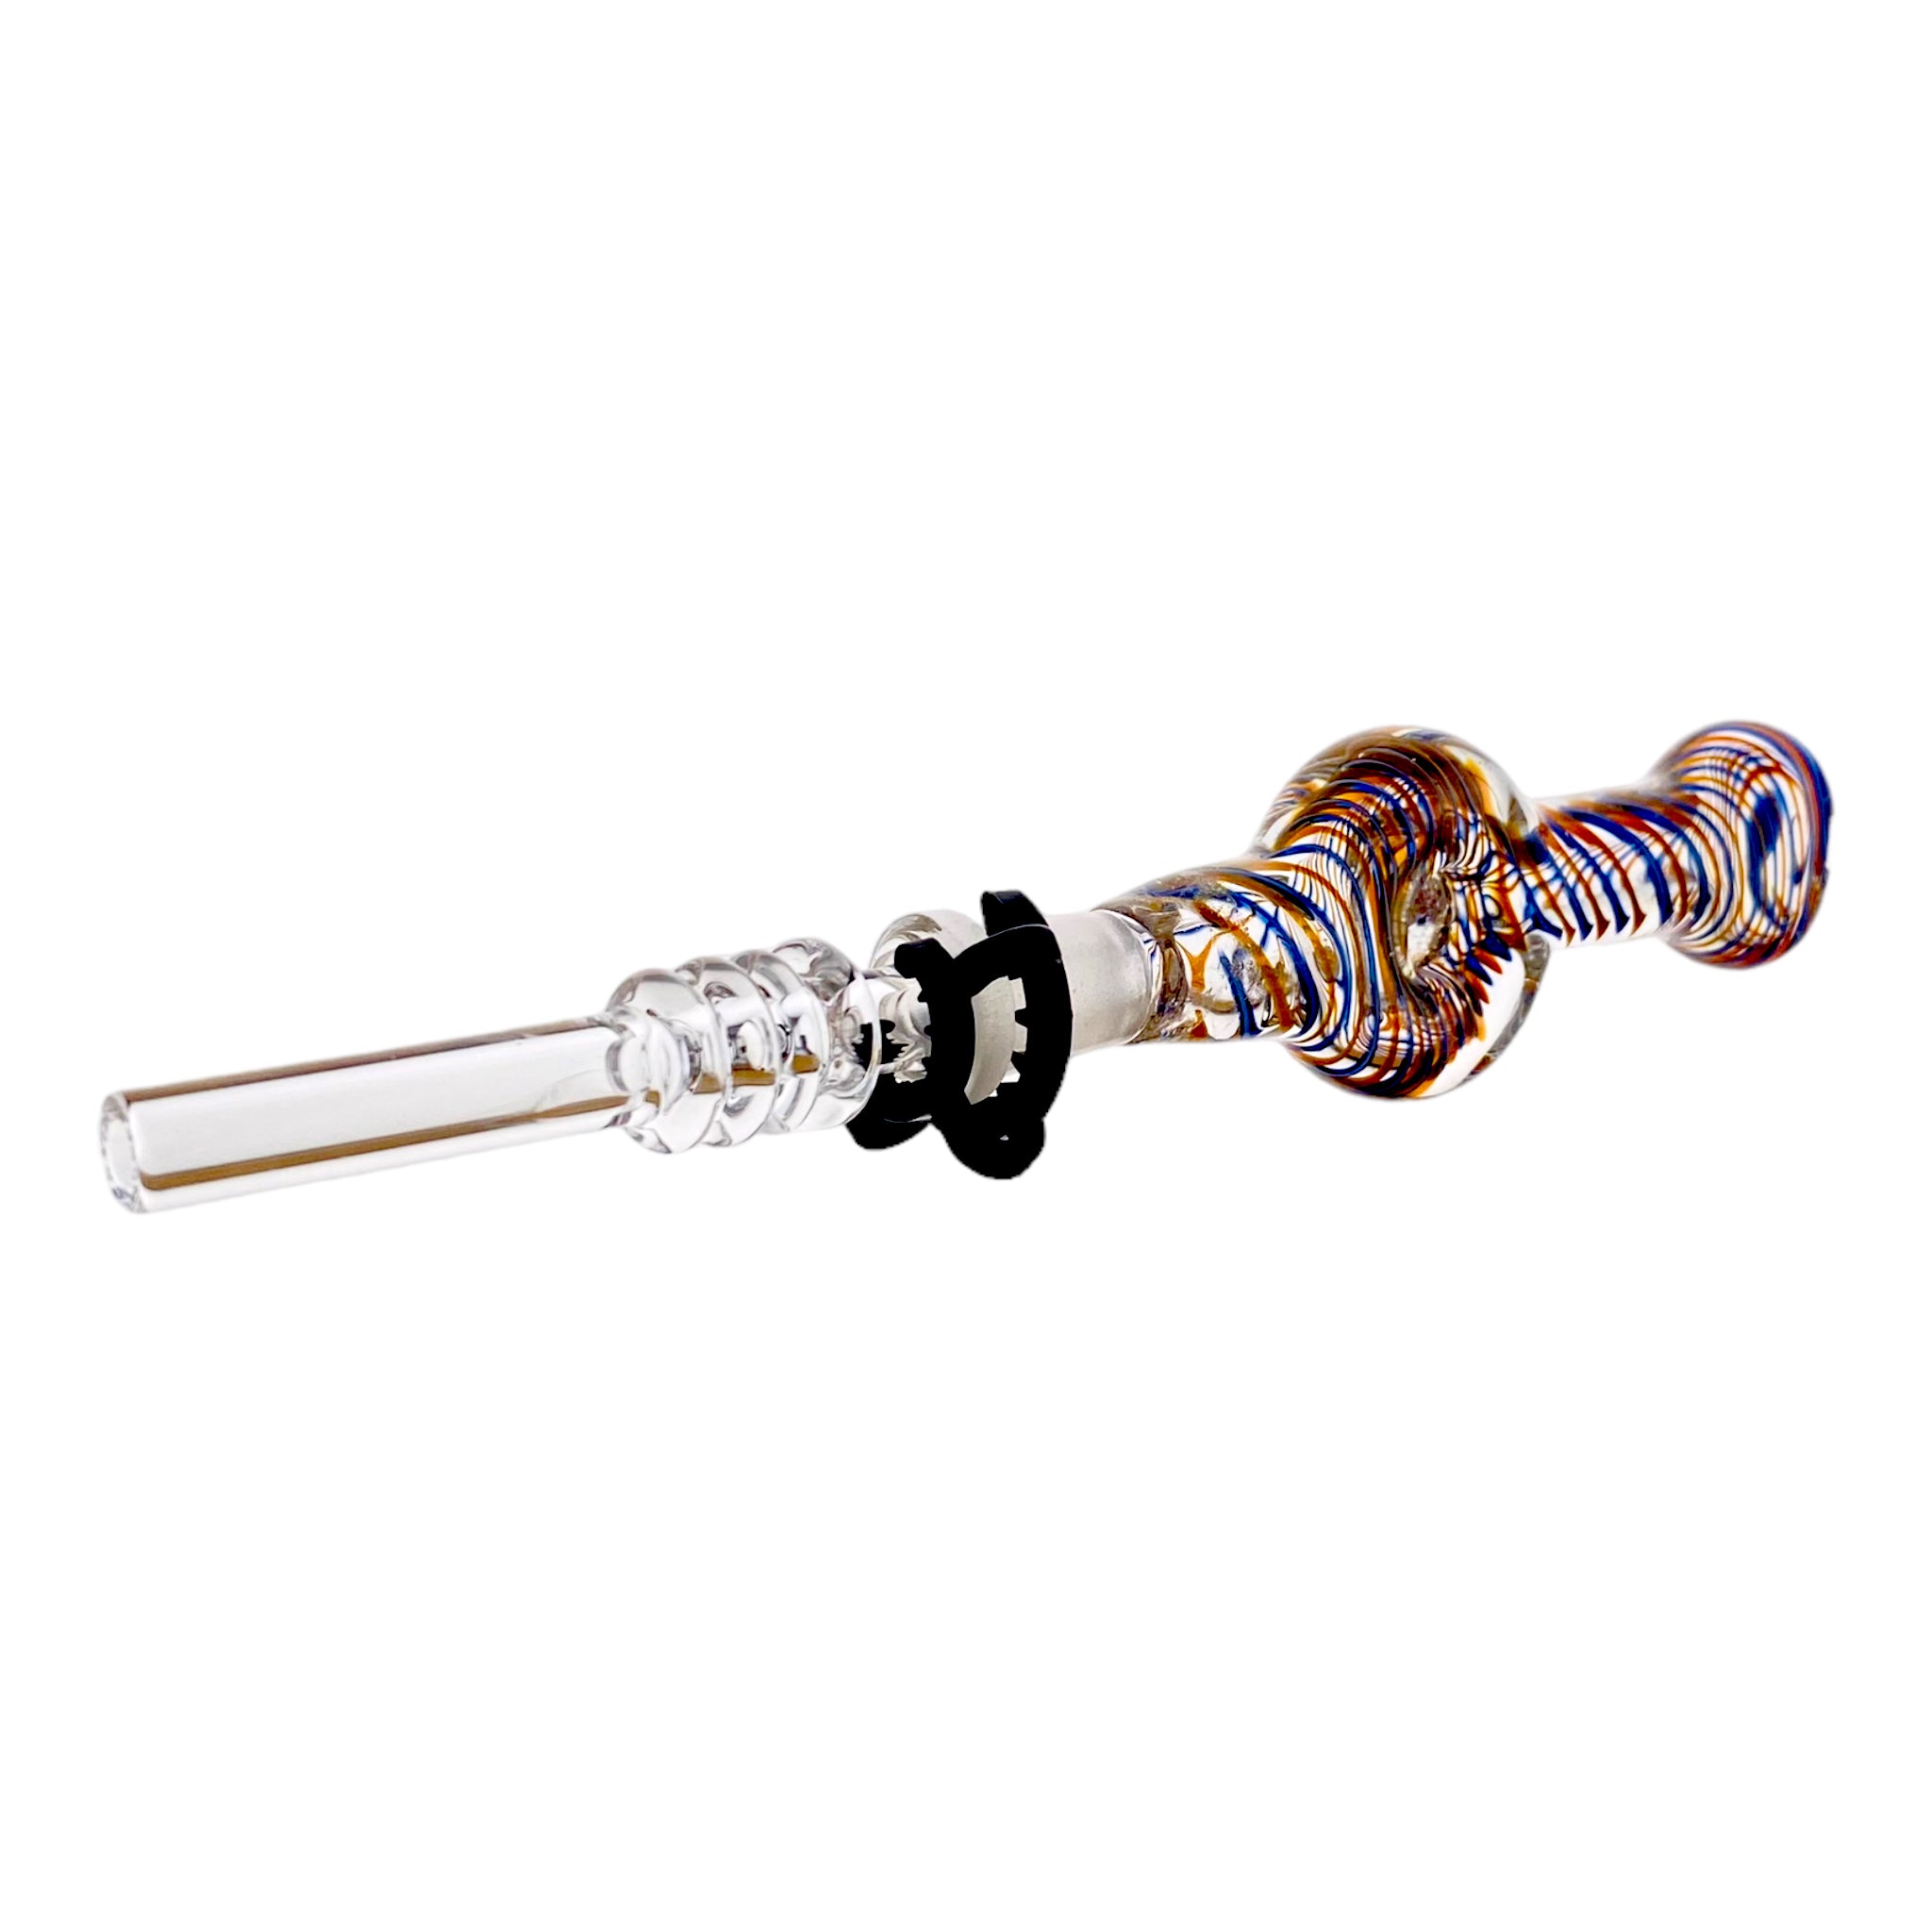 Mini 10mm Nectar Collector Kit - B0870 – Primate Glass